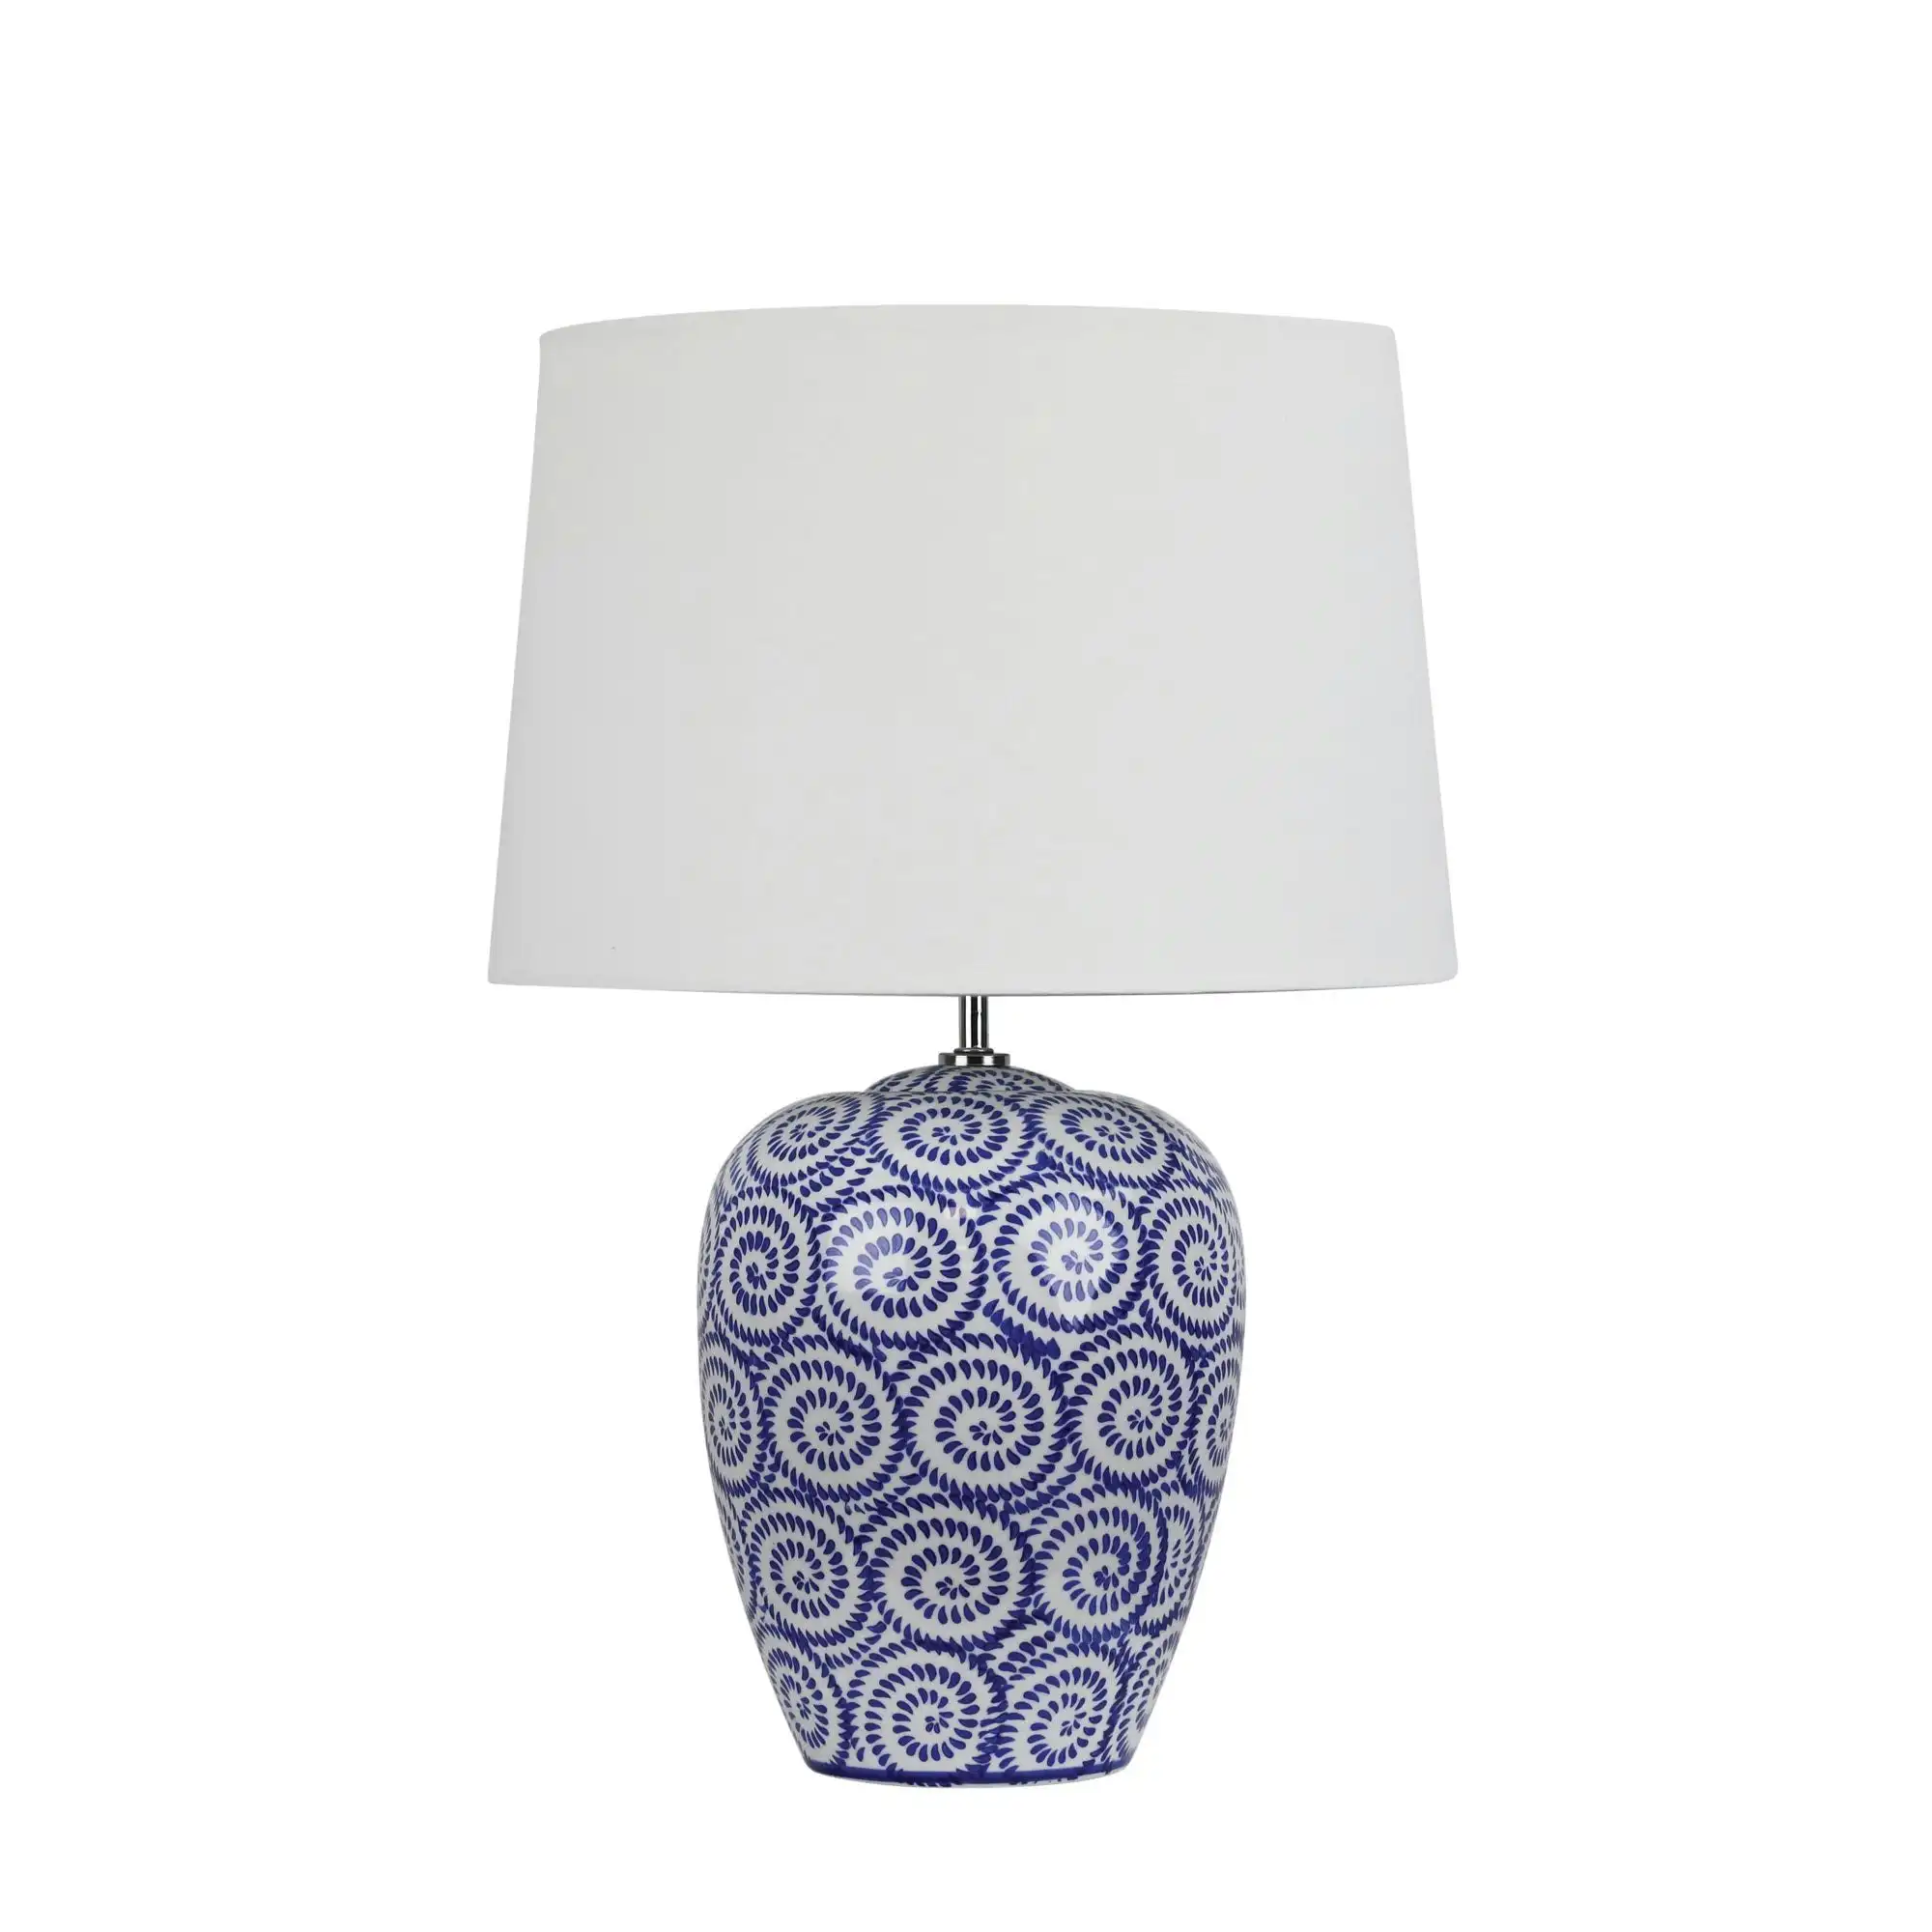 PIPPI Ivory and Blue Ceramic Table Lamp